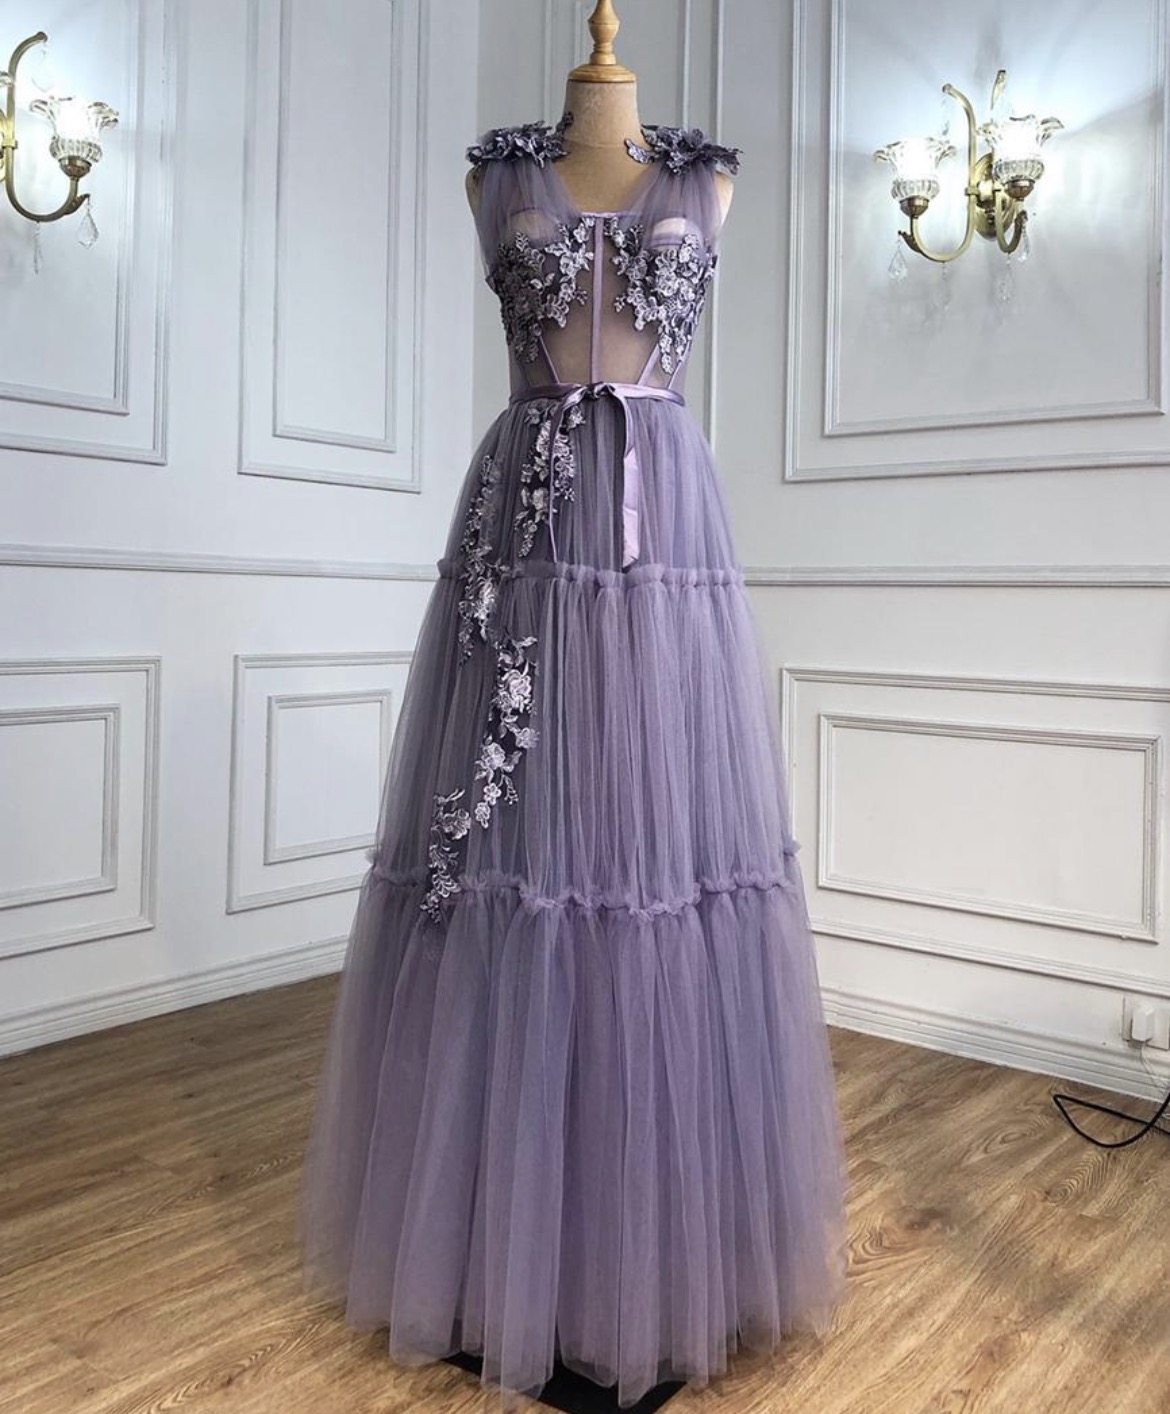 Lilac Floral Lace Evening Gown Dress - Evening Dresses, Made To Order ...